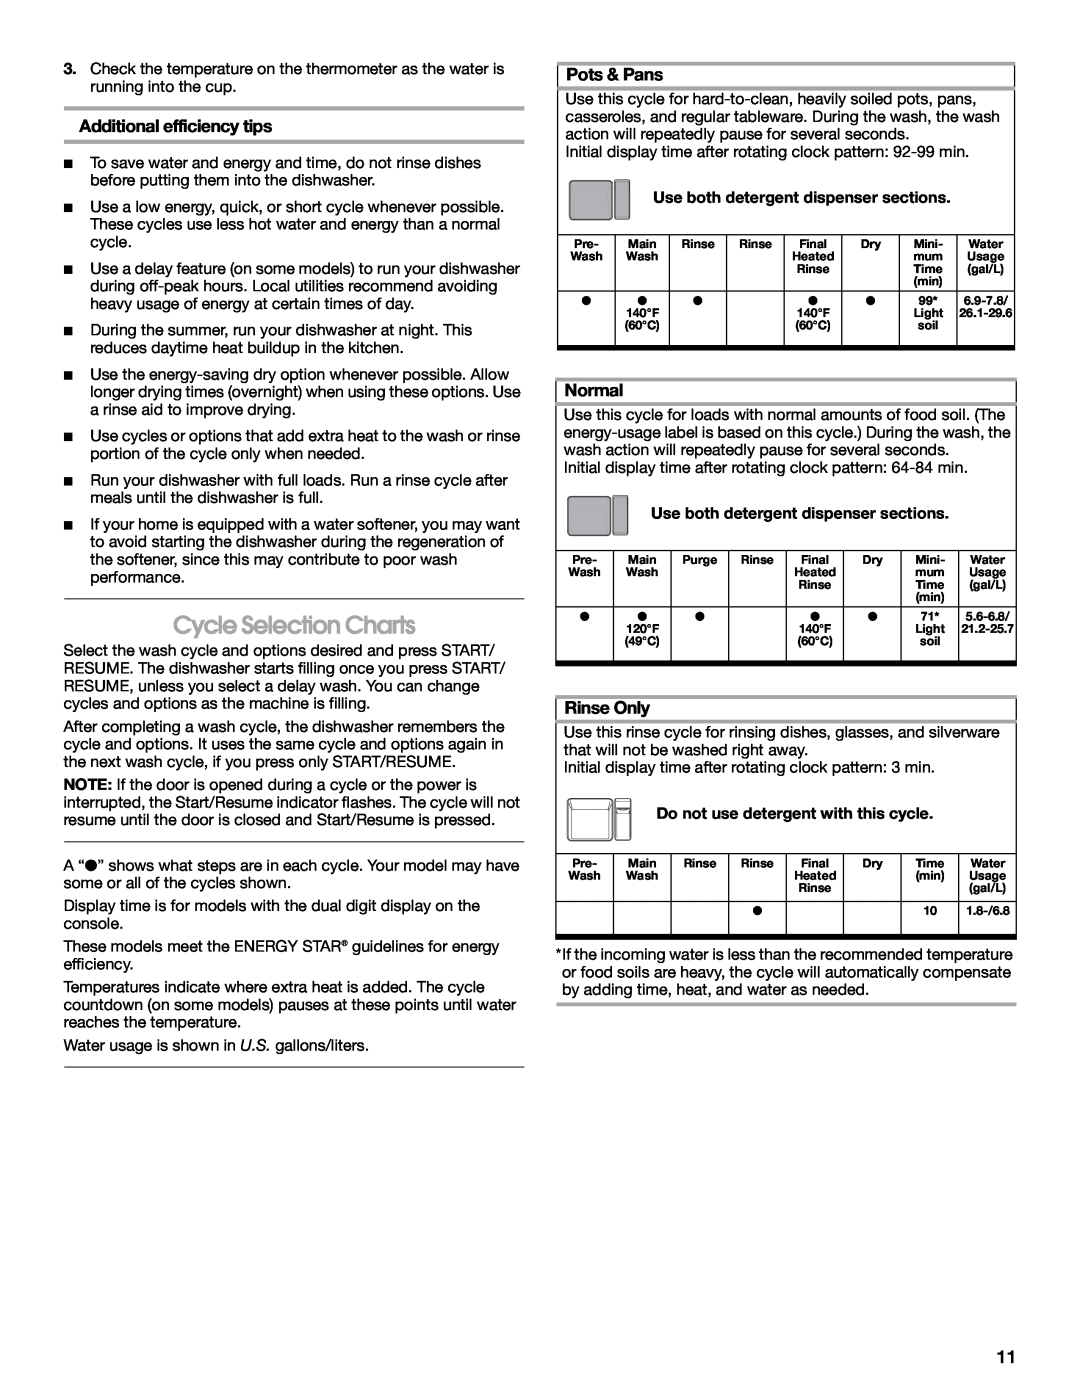 Whirlpool TUD8750S manual Cycle Selection Charts, Additional efficiency tips, Pots & Pans, Normal, Rinse Only 